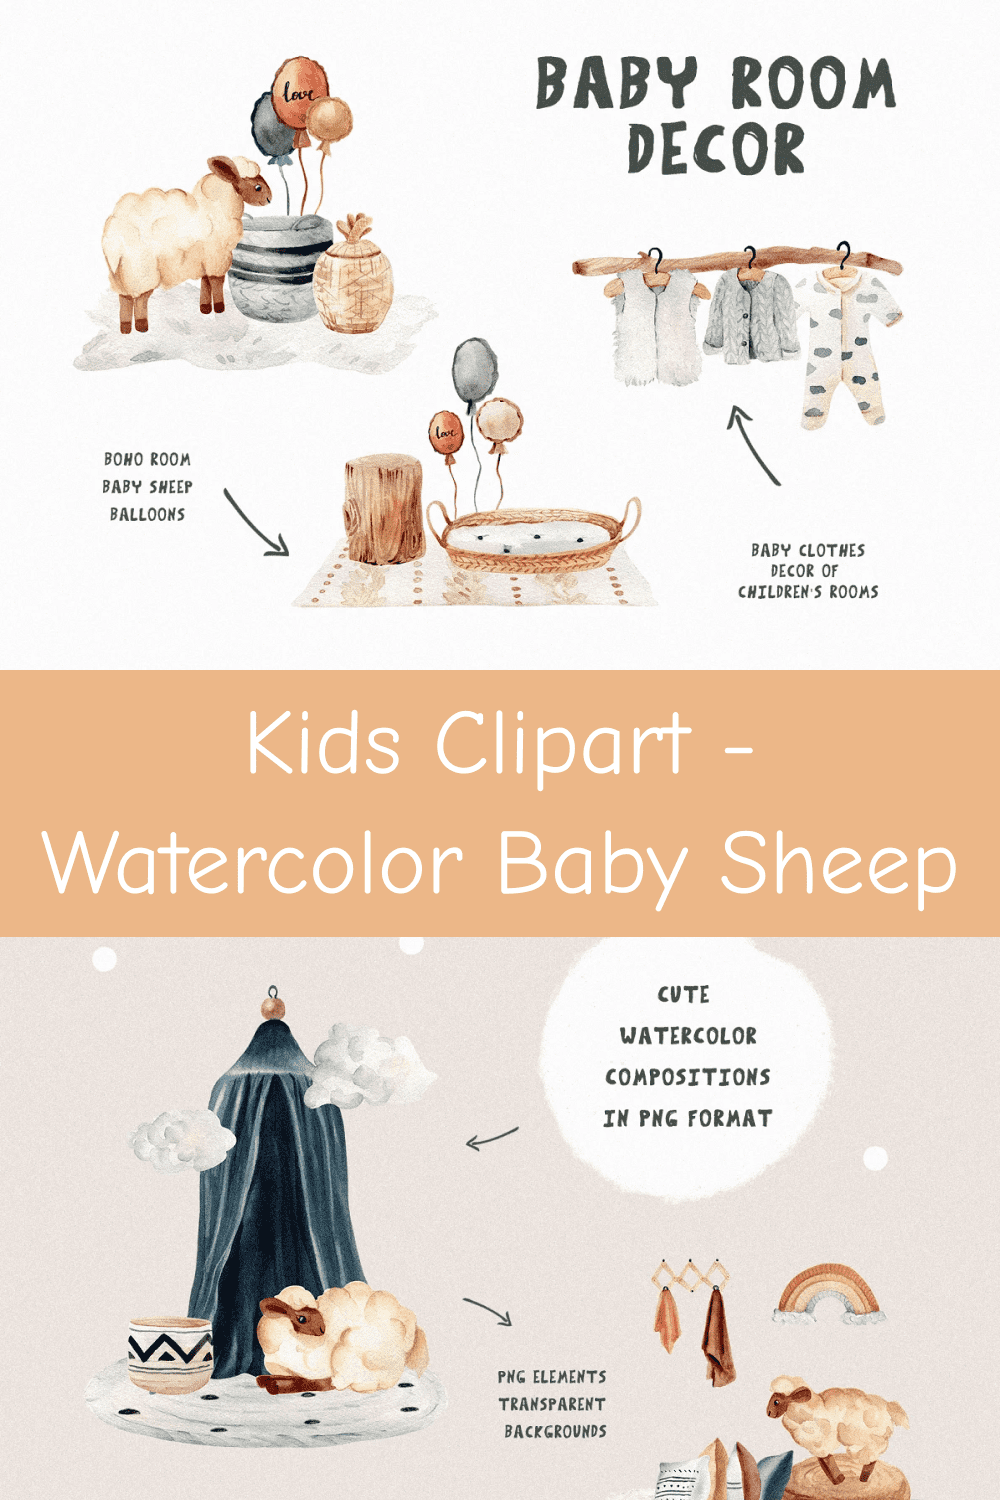 Kids Clipart - Watercolor Baby Sheep.